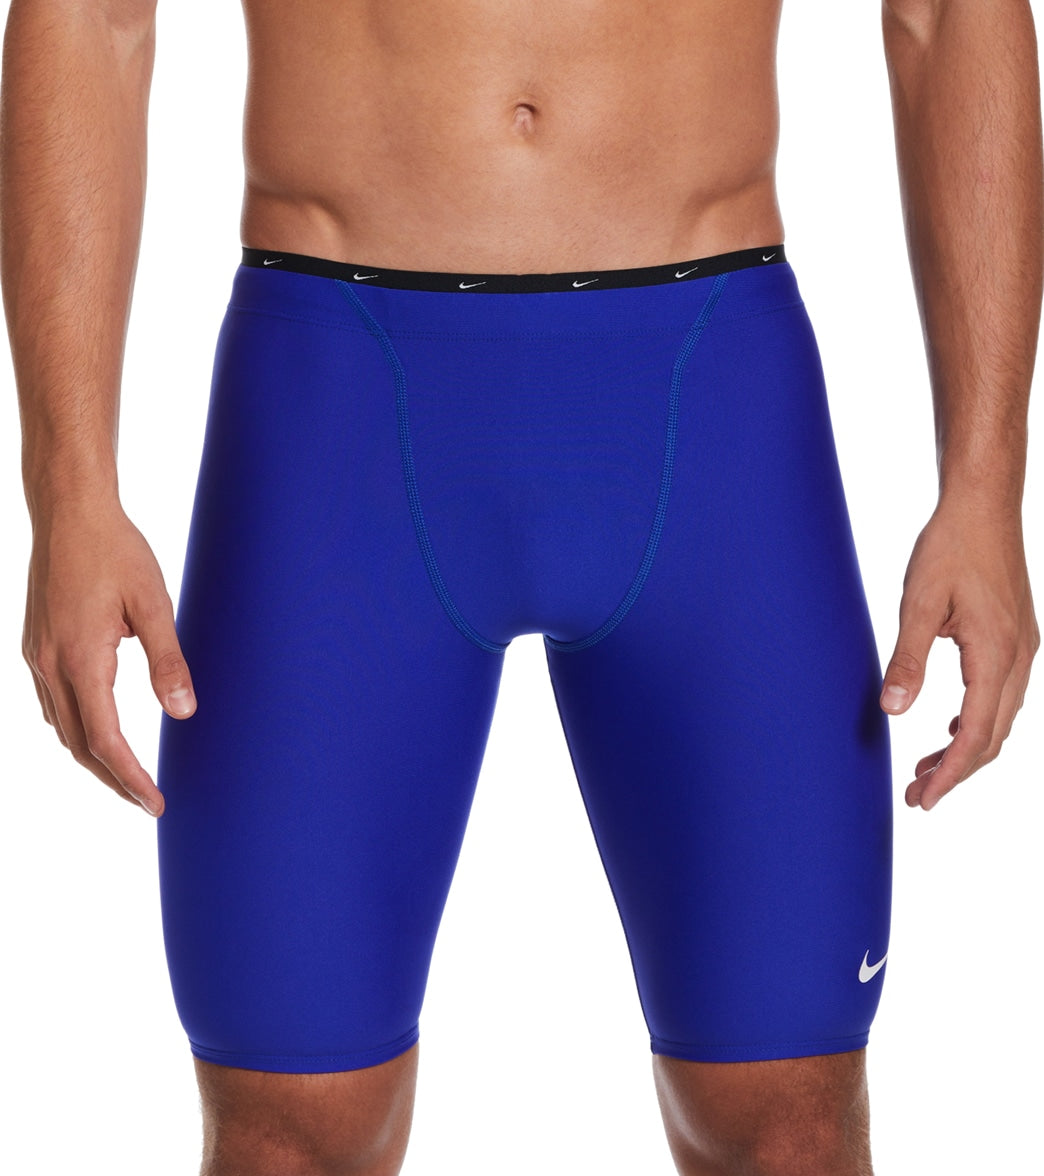 Nike Men's HydraStrong Colorblock Brief Swimsuit at